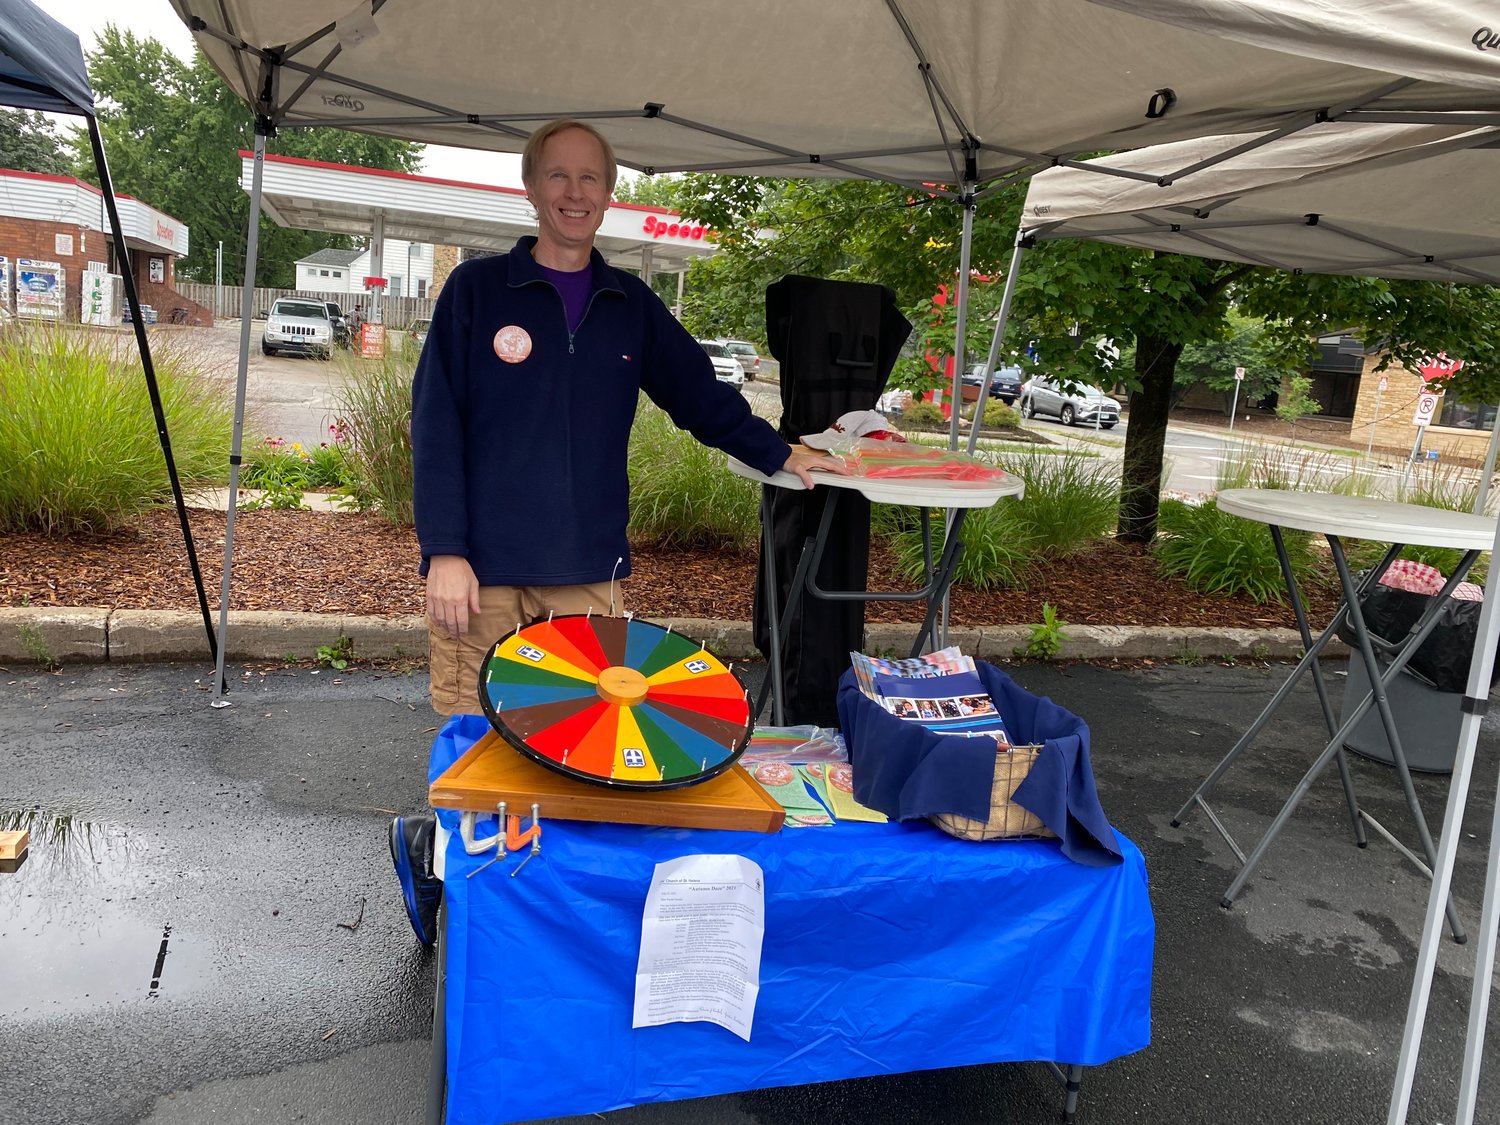 Charlie Casserly at the St. Helena's booth in Oxendale's parking lot during Crazy Days